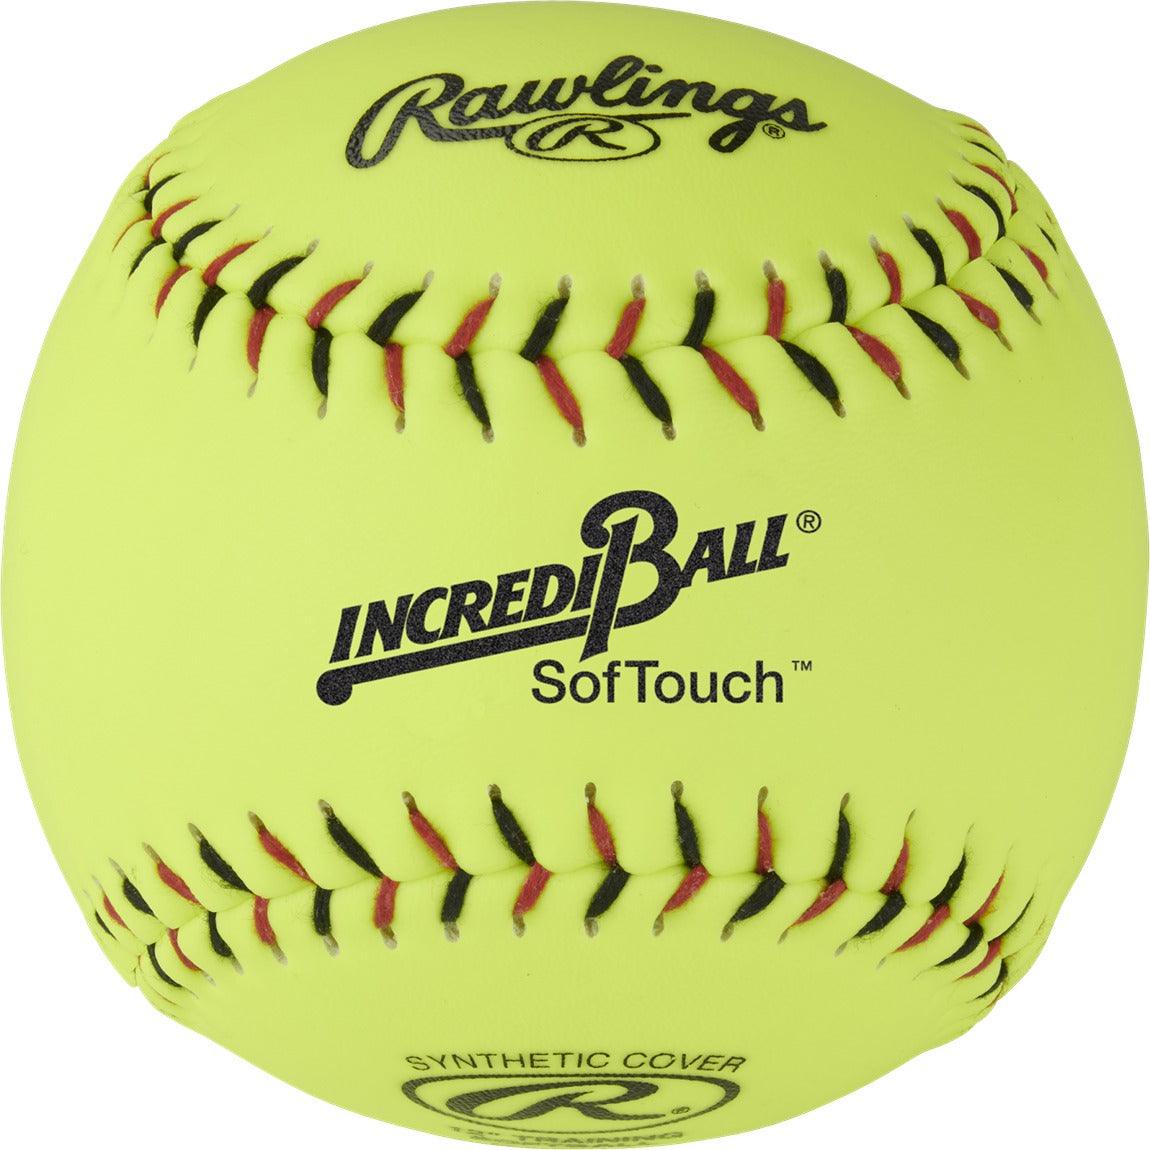 Rawlings Incredi-Ball 12" Yellow Soft-Touch Baseballs - Sports Excellence